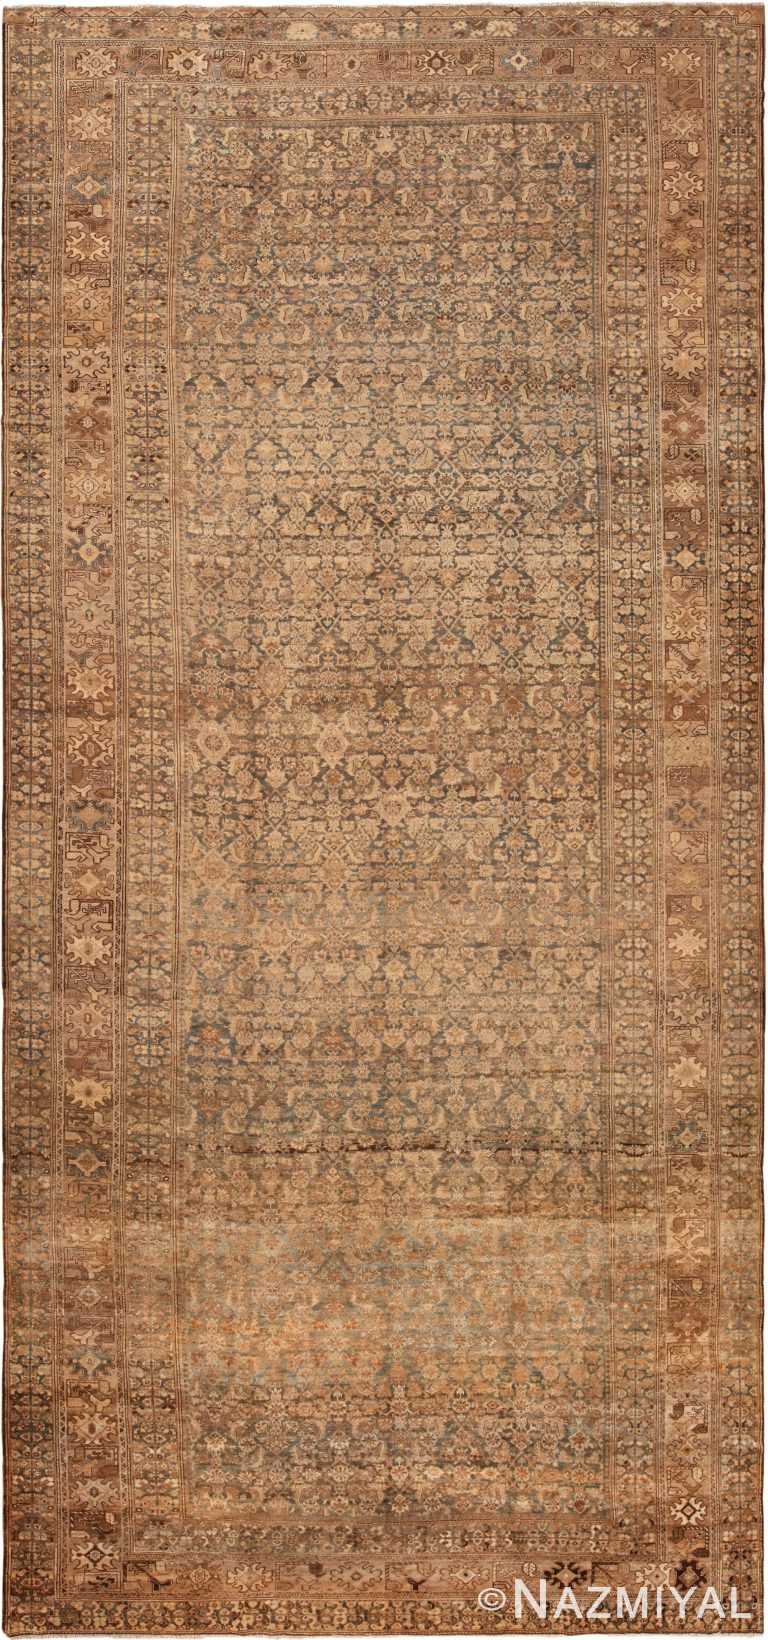 Oversized Antique Persian Malayer Rug 71334 by Nazmiyal Antique Rugs